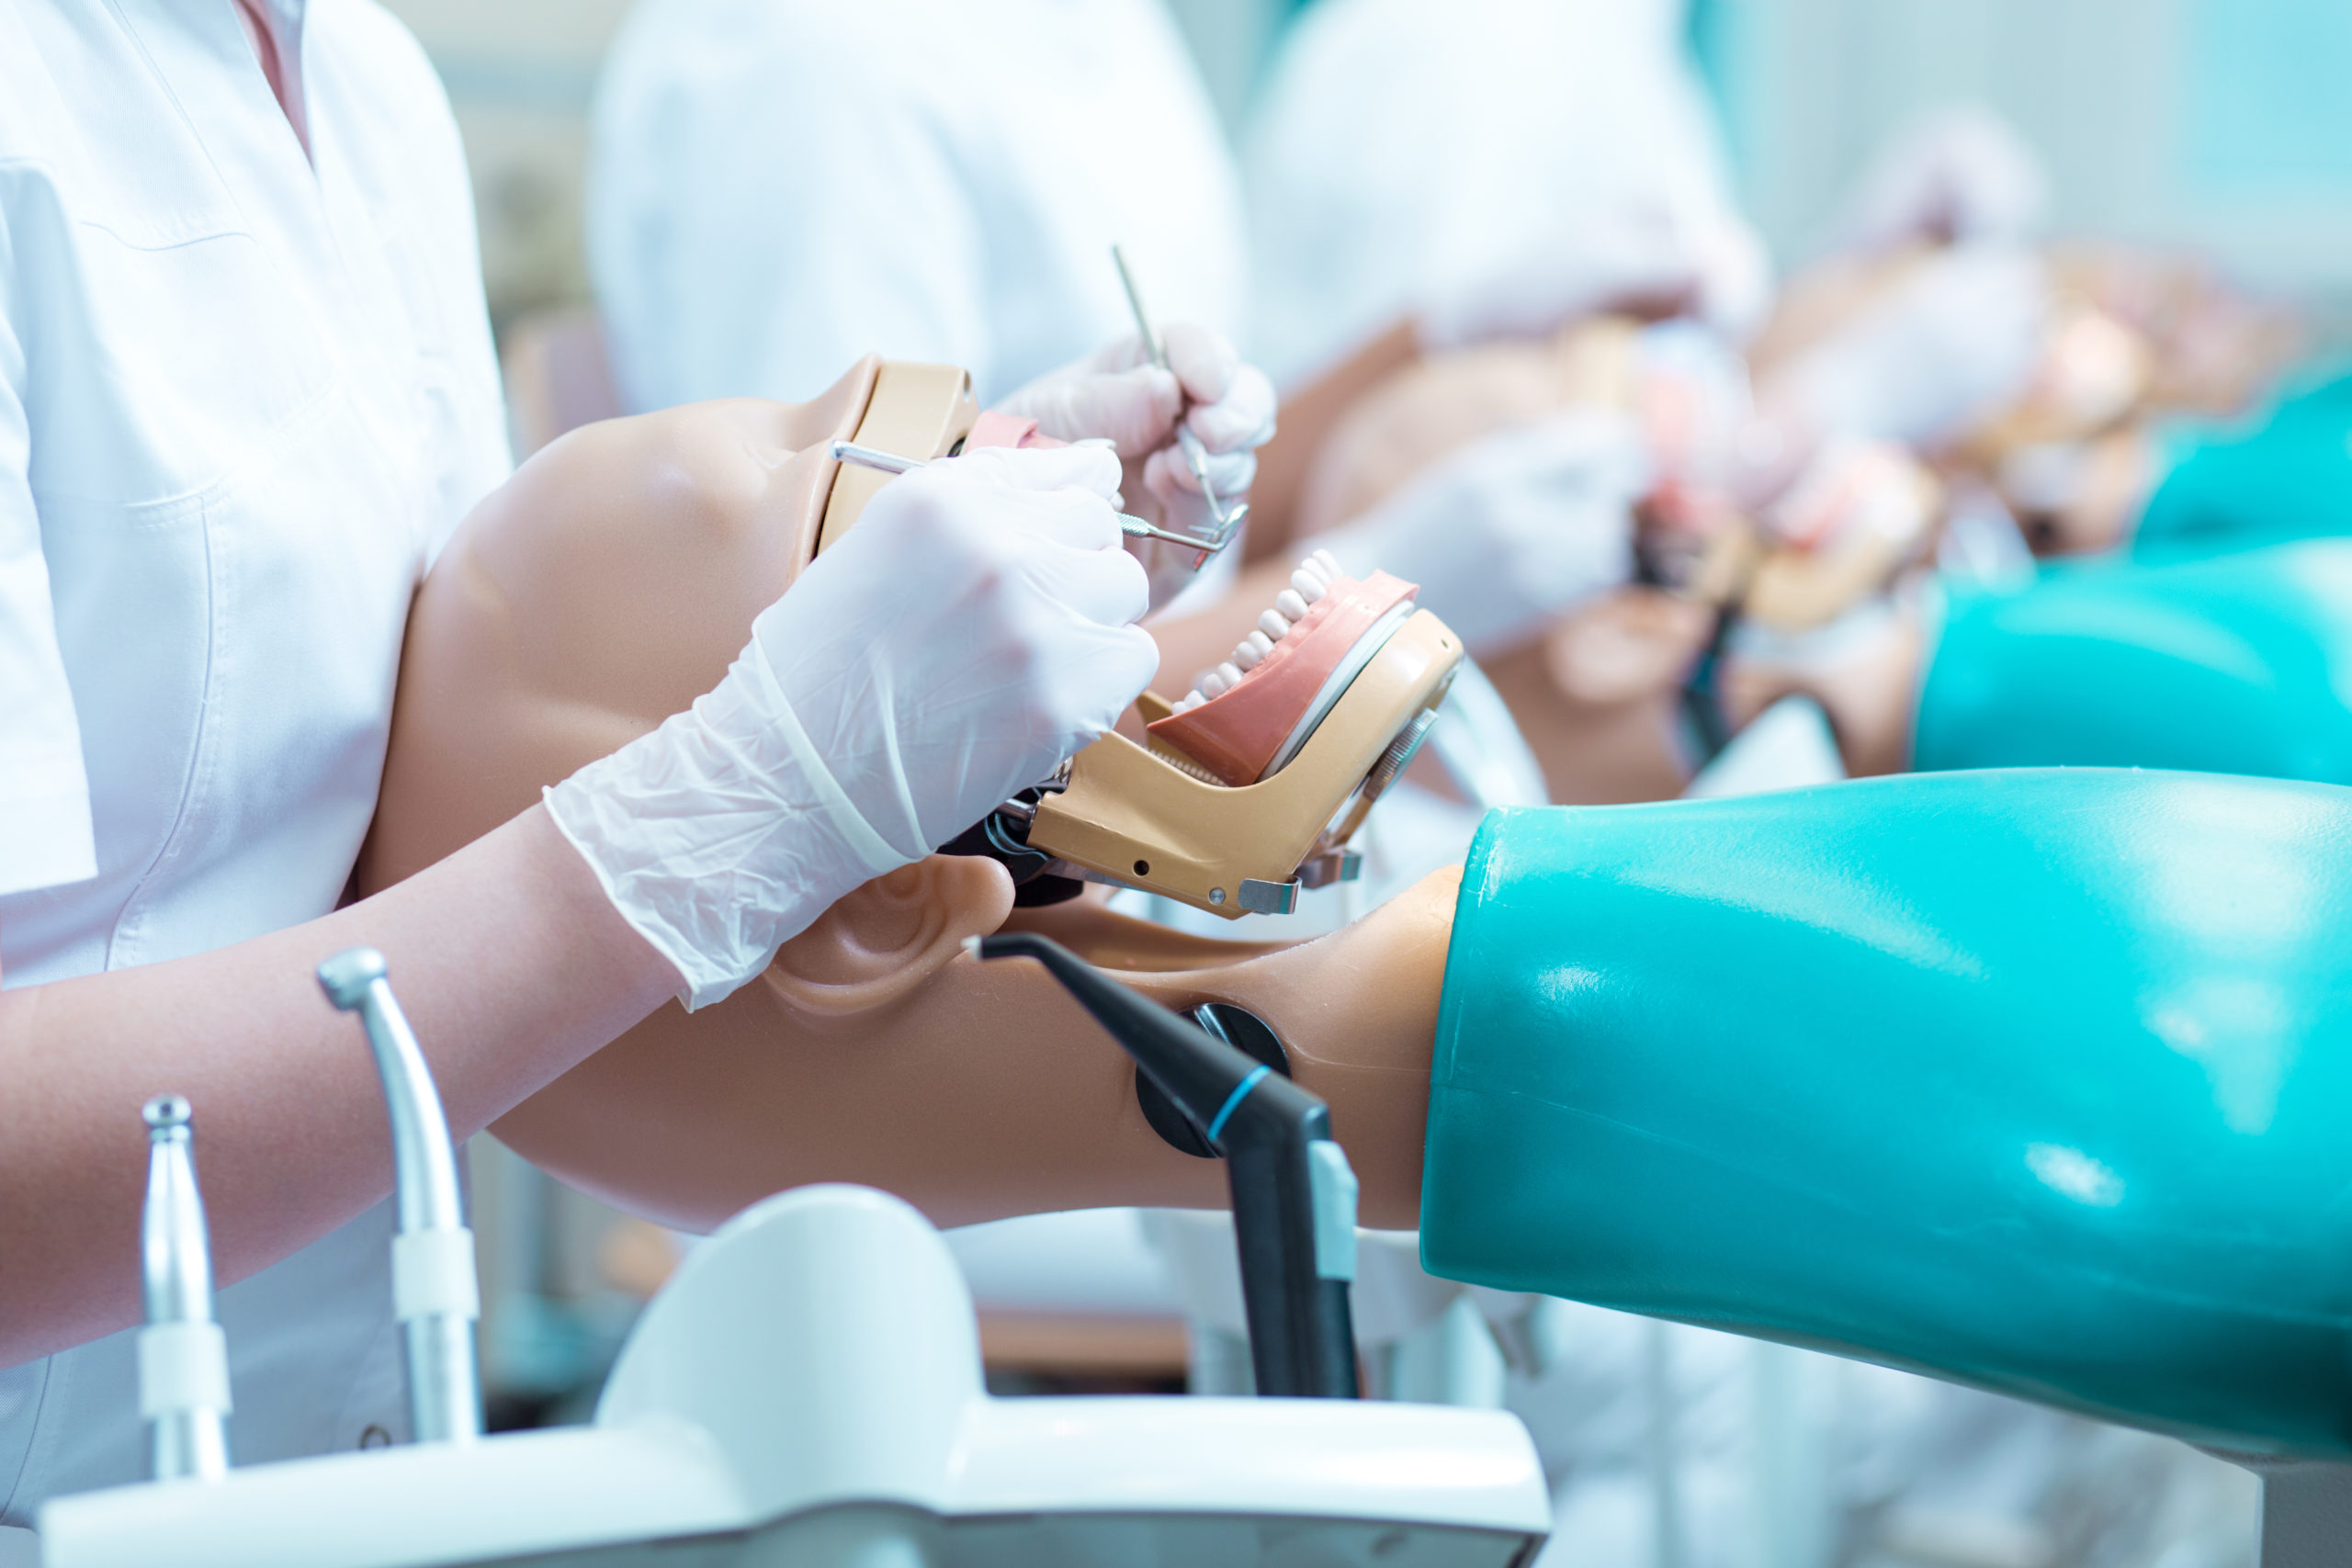 How to Become a Dentist: Training, Licensing and Certification Requirements